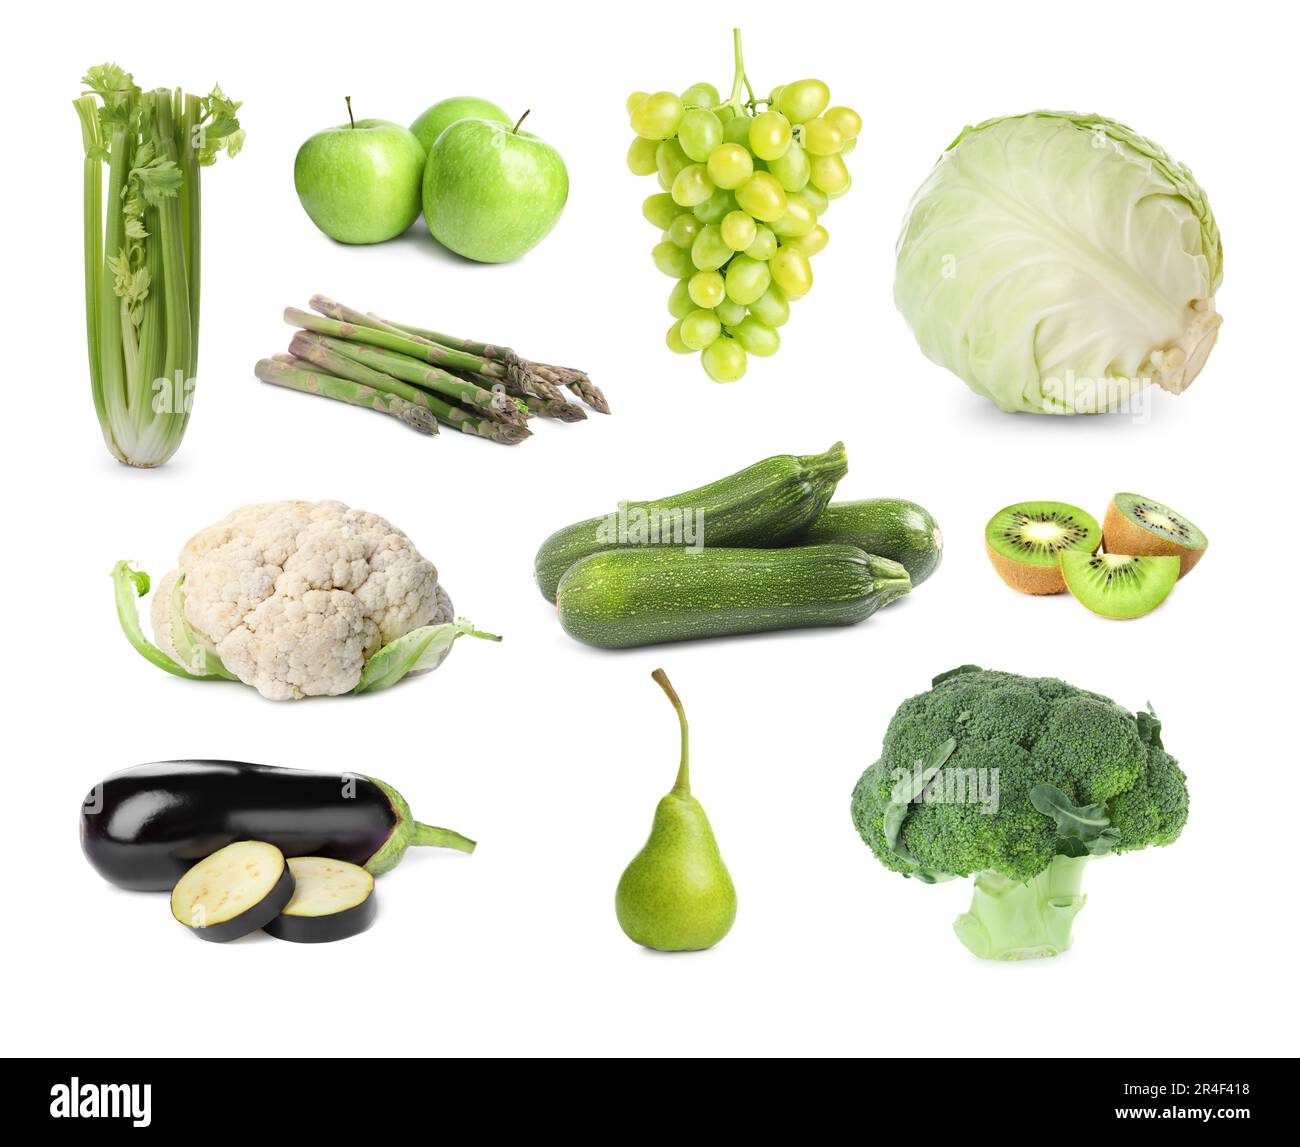 Set with many different fruits and vegetables on white background Stock Photo